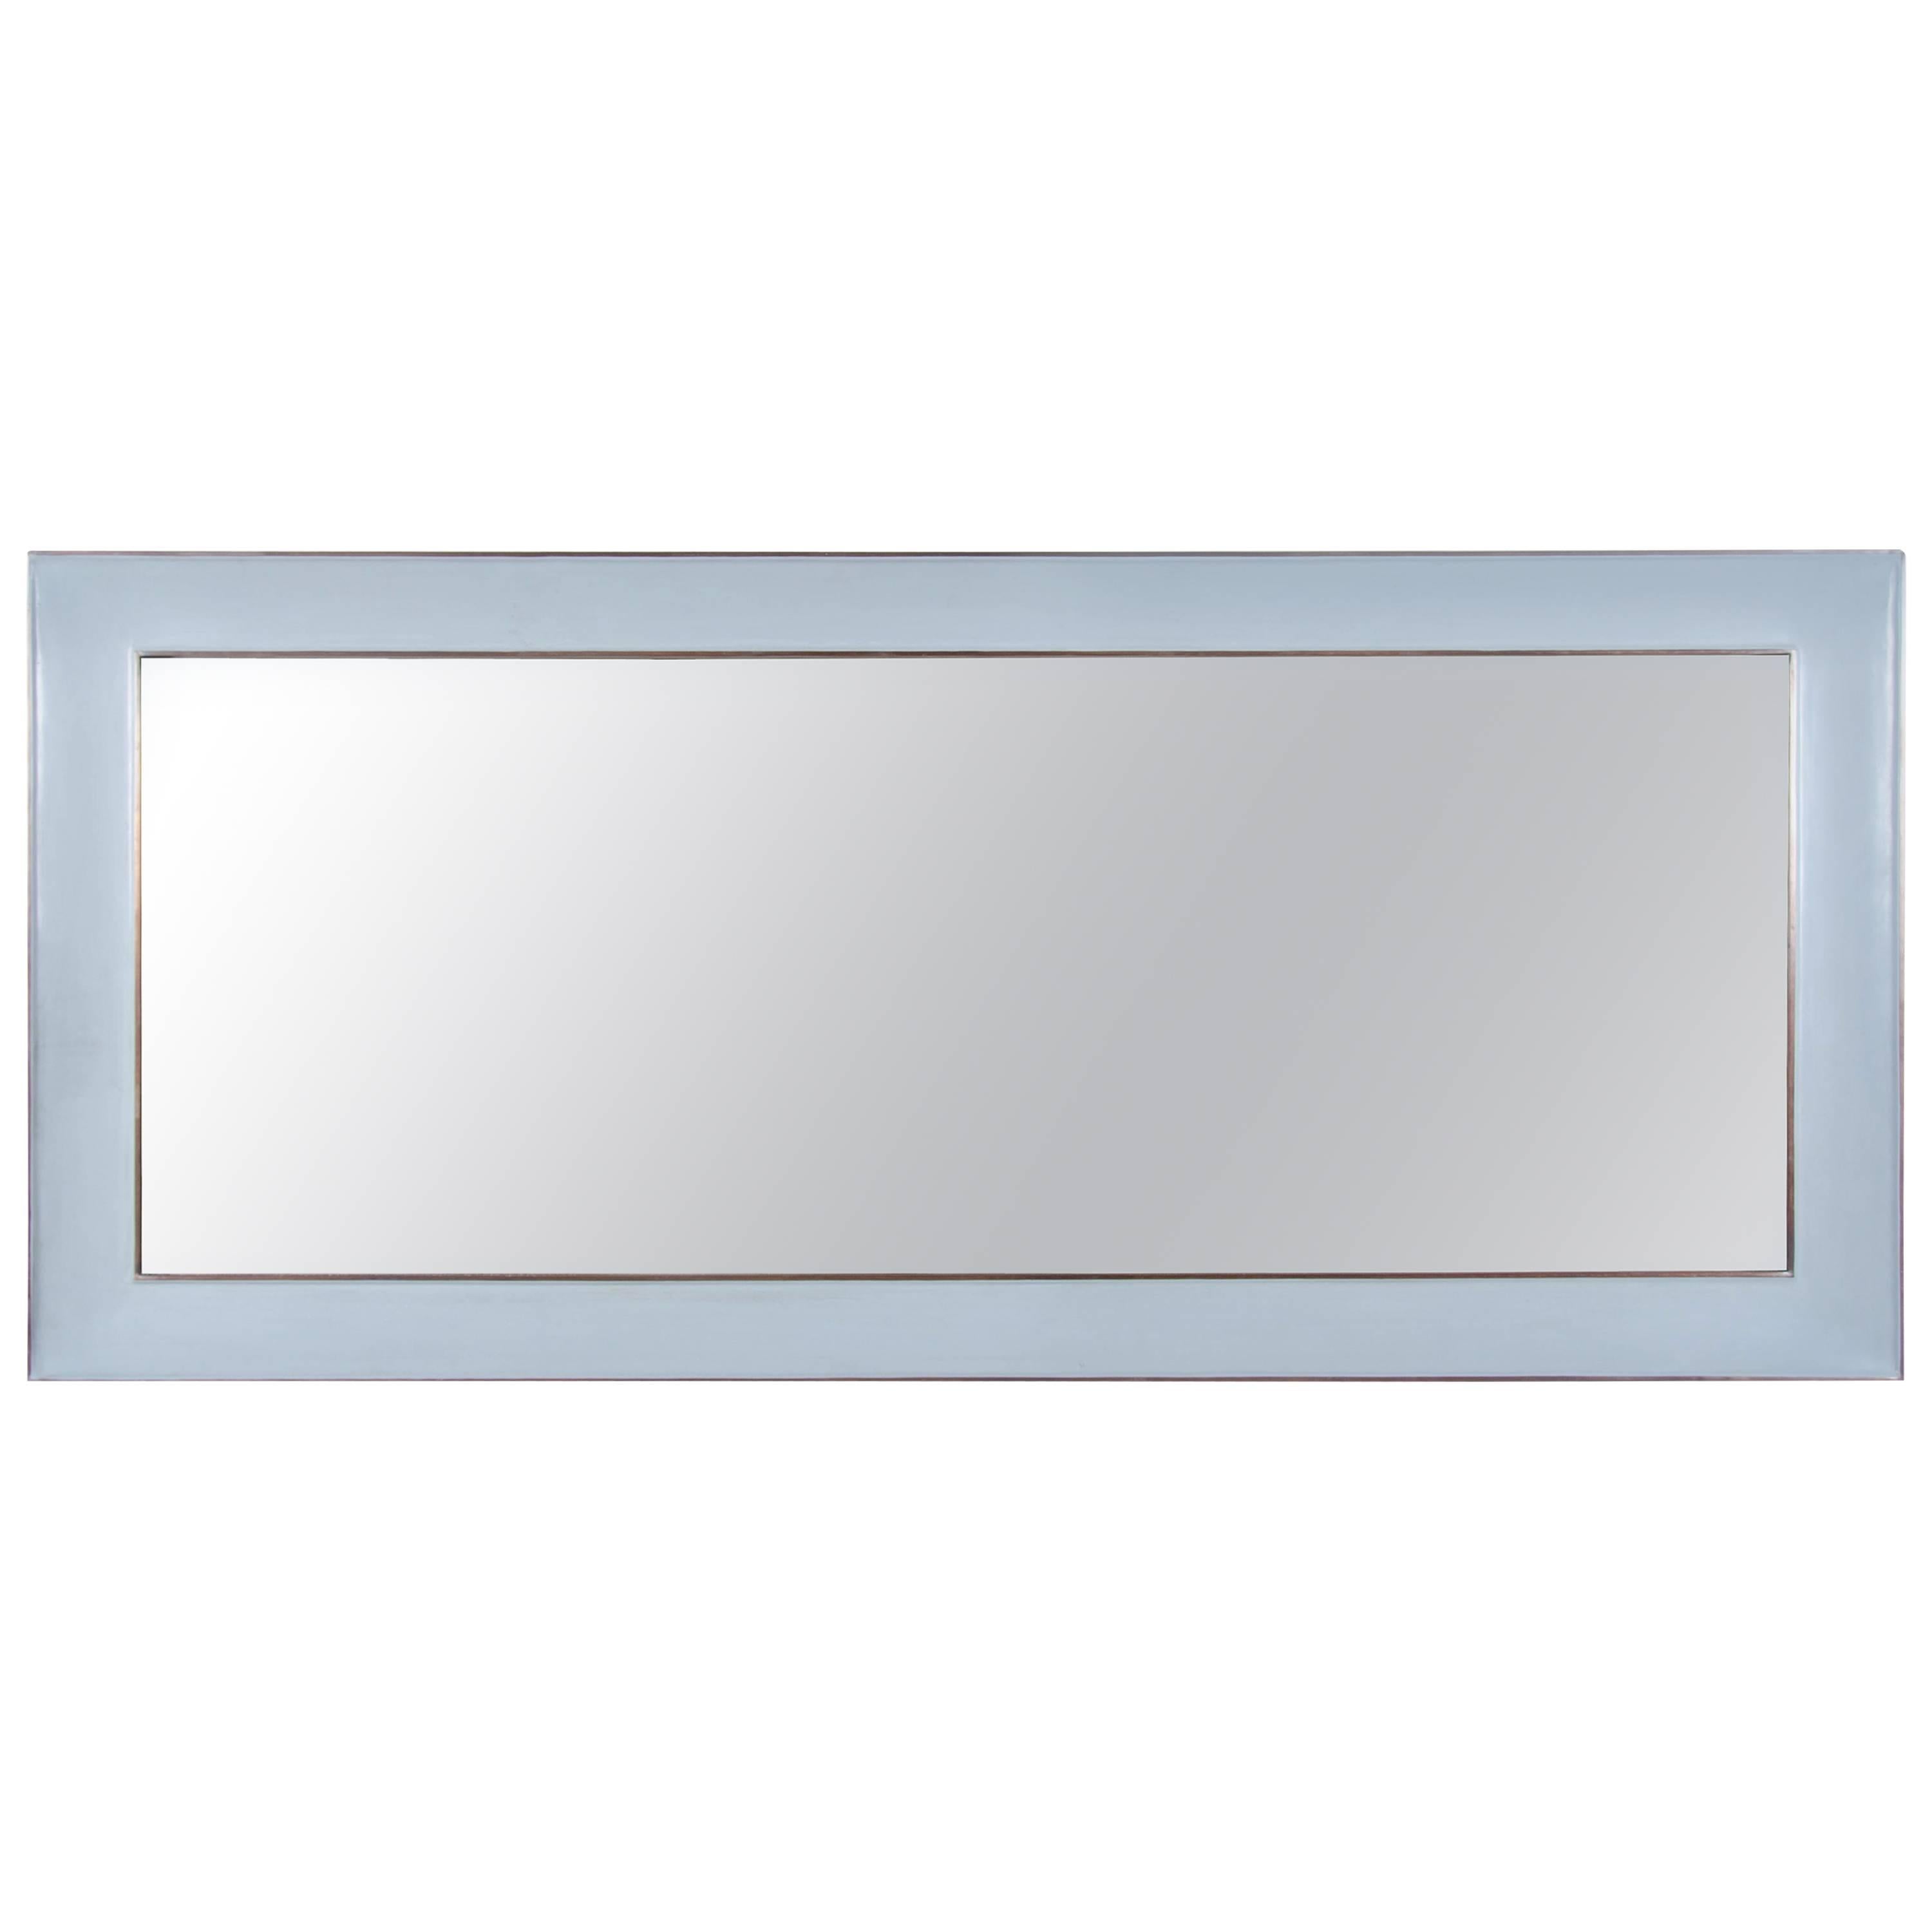 Full Length Vanity Mirror with Copper Trim by Robert Kuo, Limited Edition